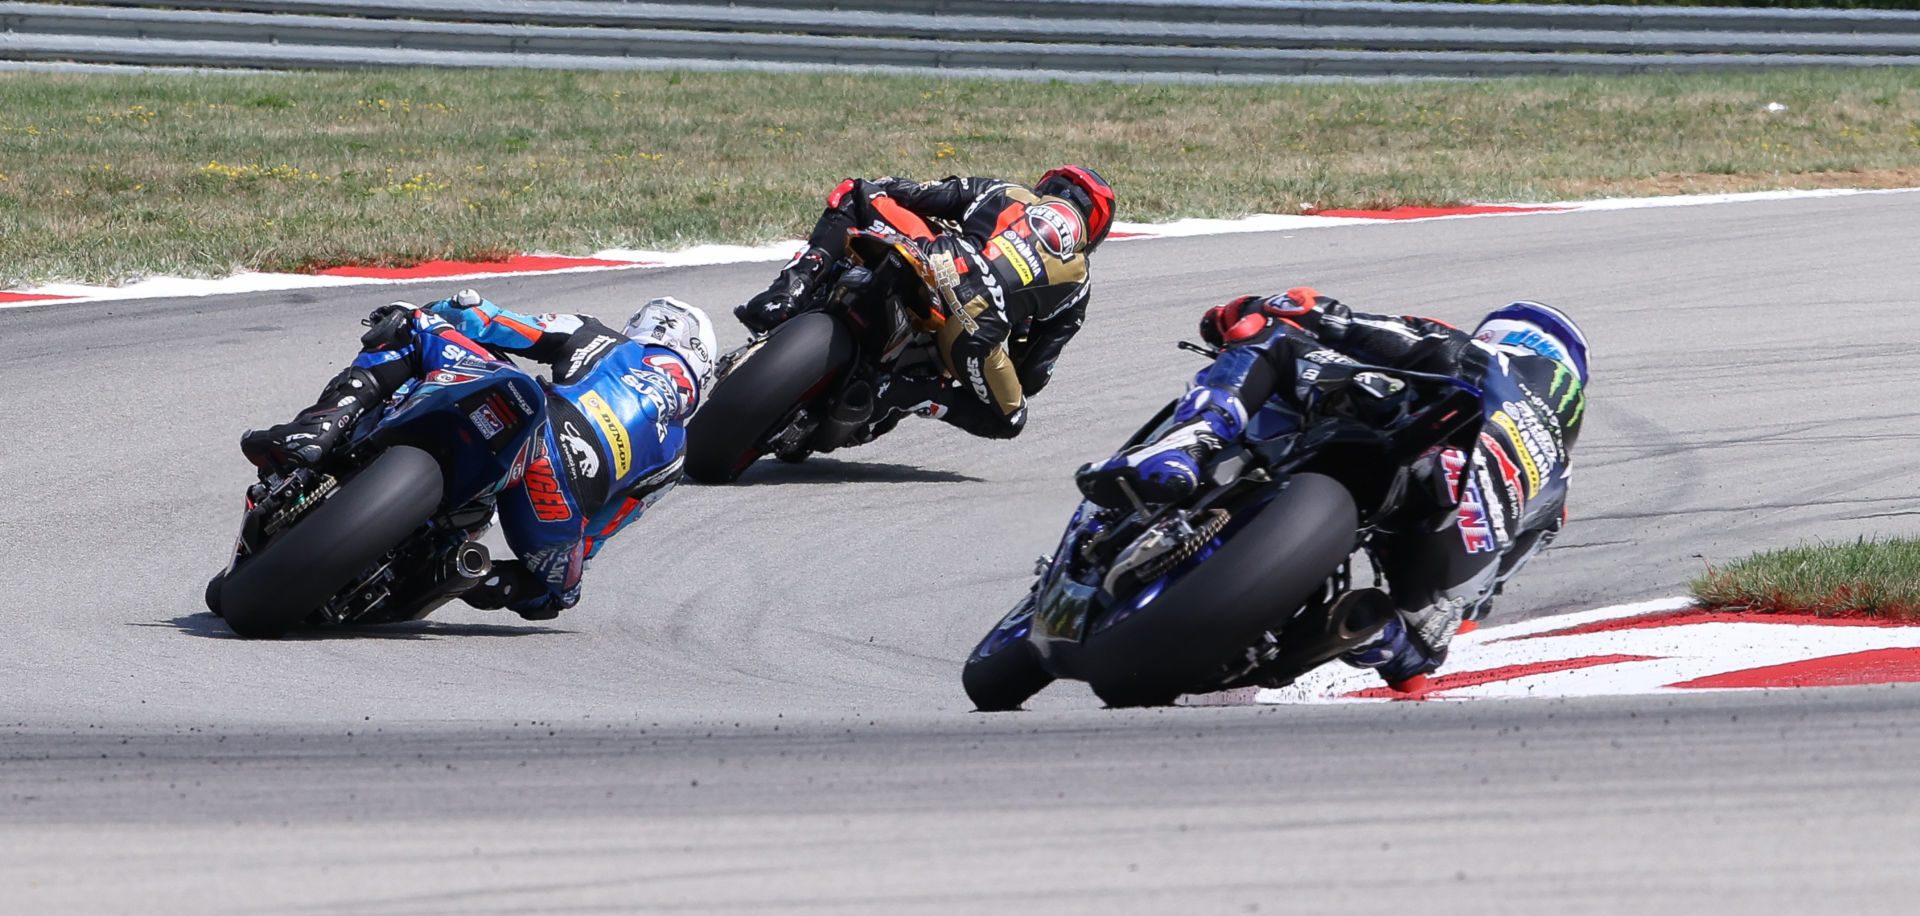 Matthew Scholtz leading Bobby Fong and Jake Gagne at PittRace. Photo by Brian J. Nelson, courtesy MotoAmerica.